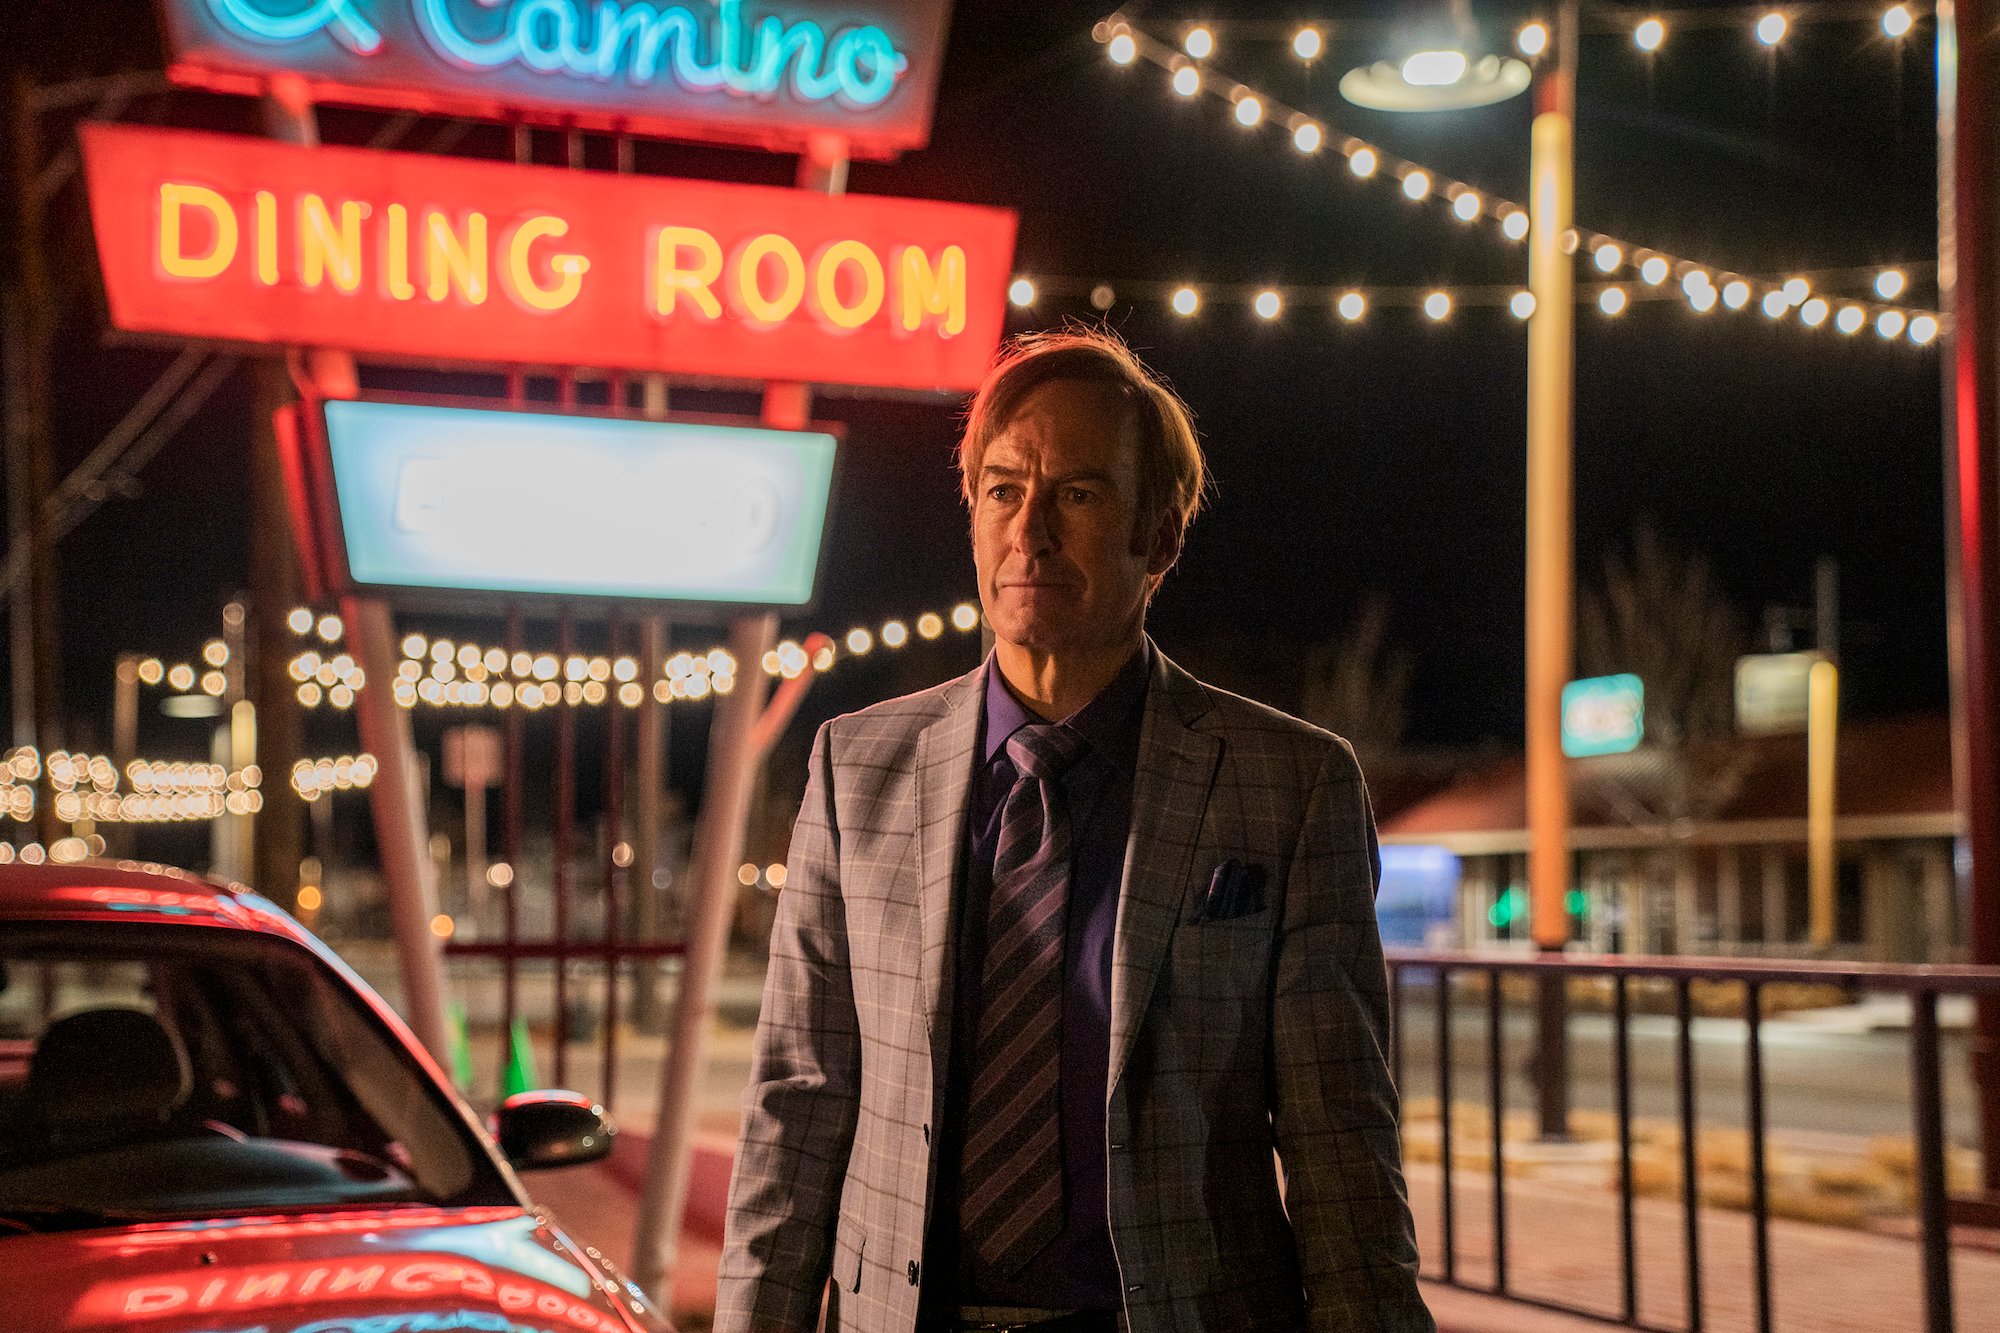 'Better Call Saul' final season photo shows Bob Odenkirk standing in El Camino parking lot